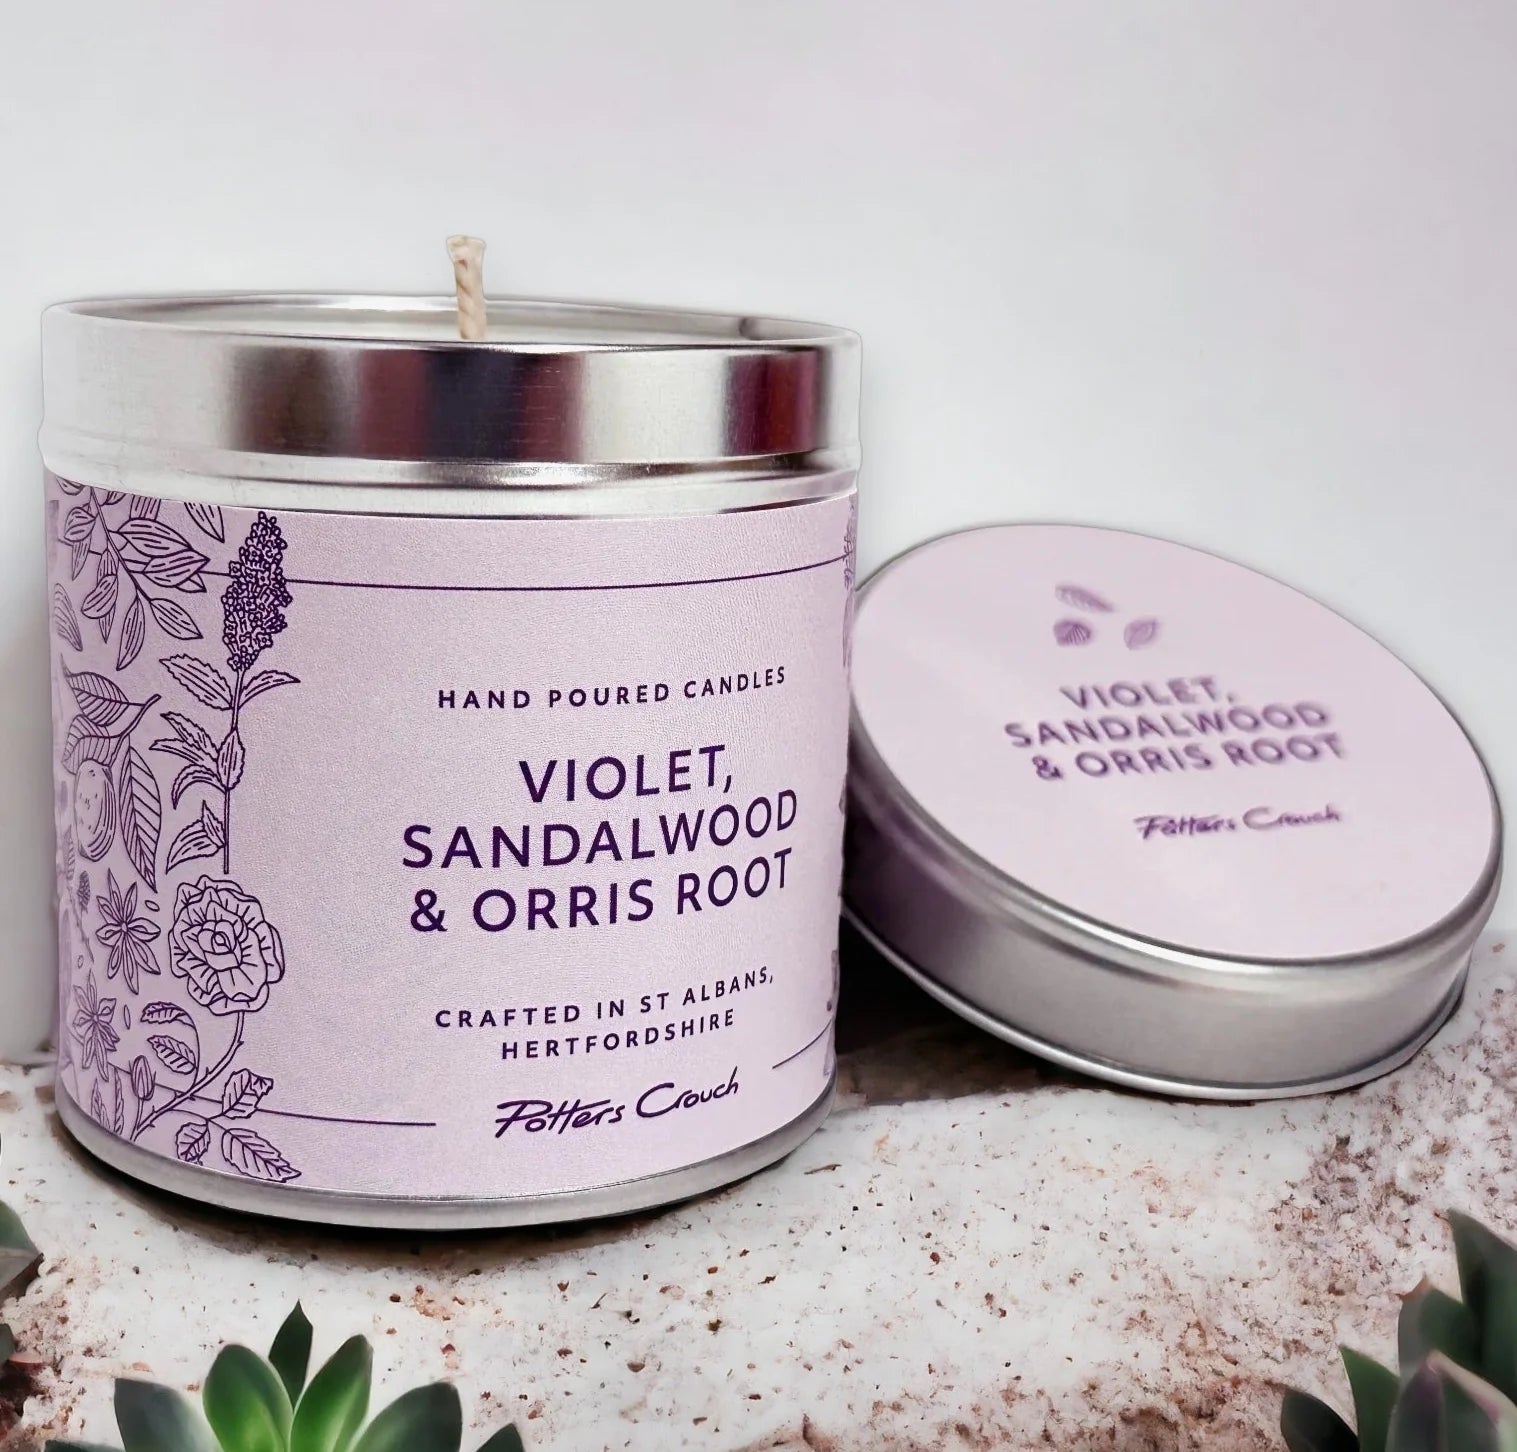 Energy Wellness Candle with Violet, Sandalwood & Orris Root